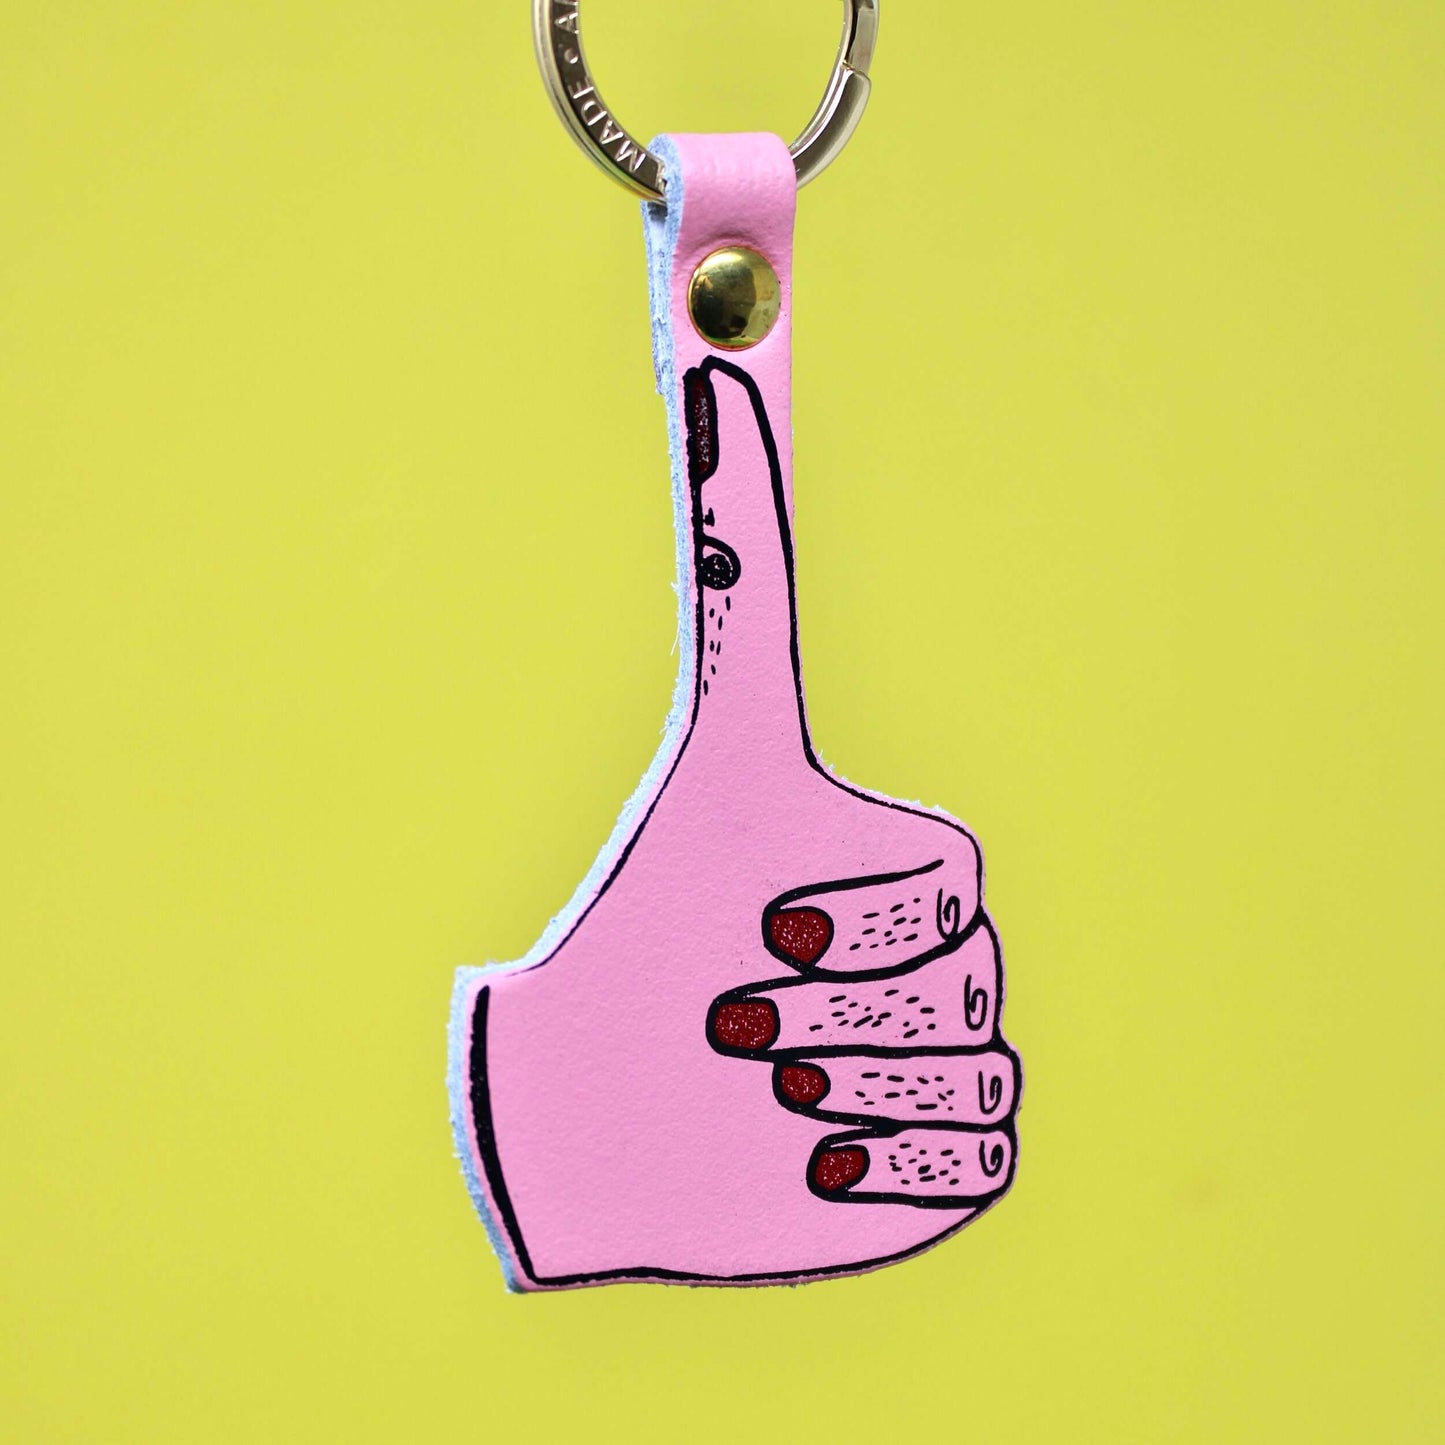 Genuine leather key ring featuring a pink hand with foil embossed nails making a thumbs up sign. In a David Shrigley style.